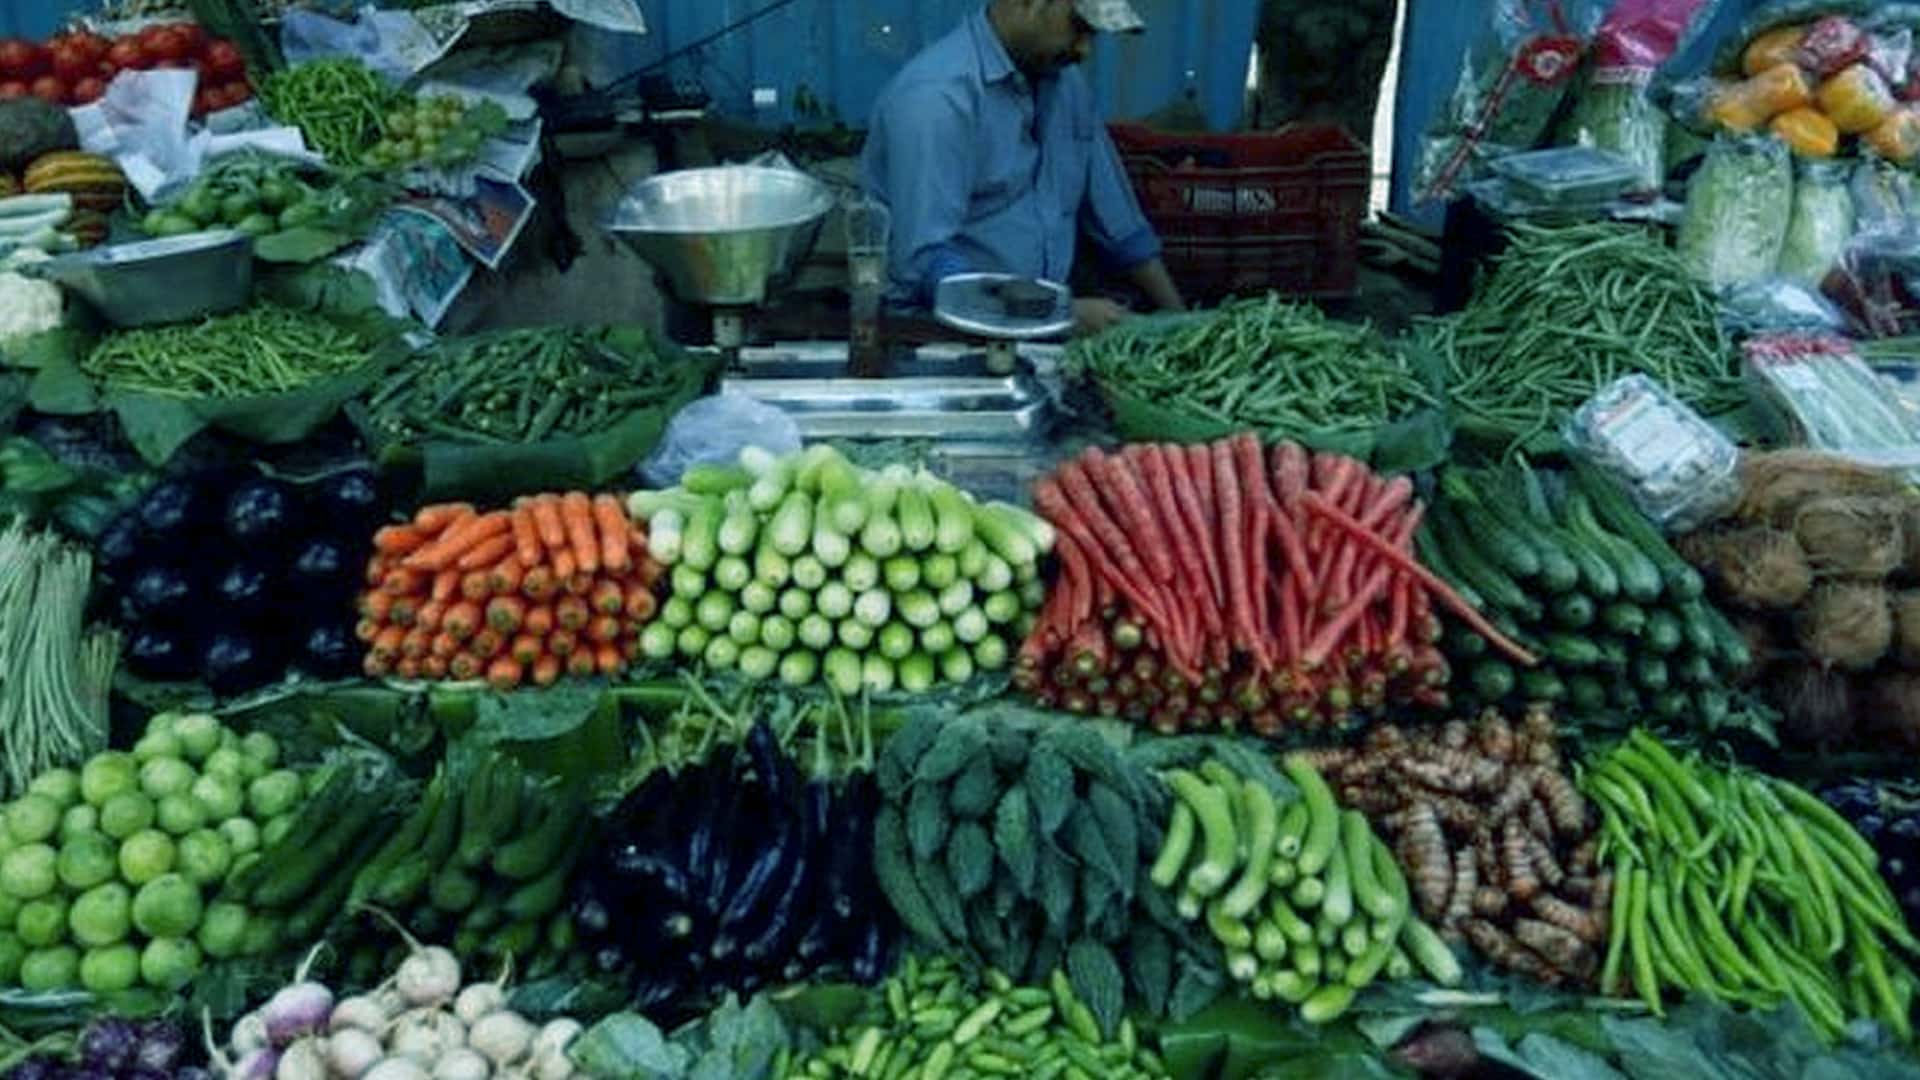 Retail inflation falls to 11-month low of 5.88 pc in Nov